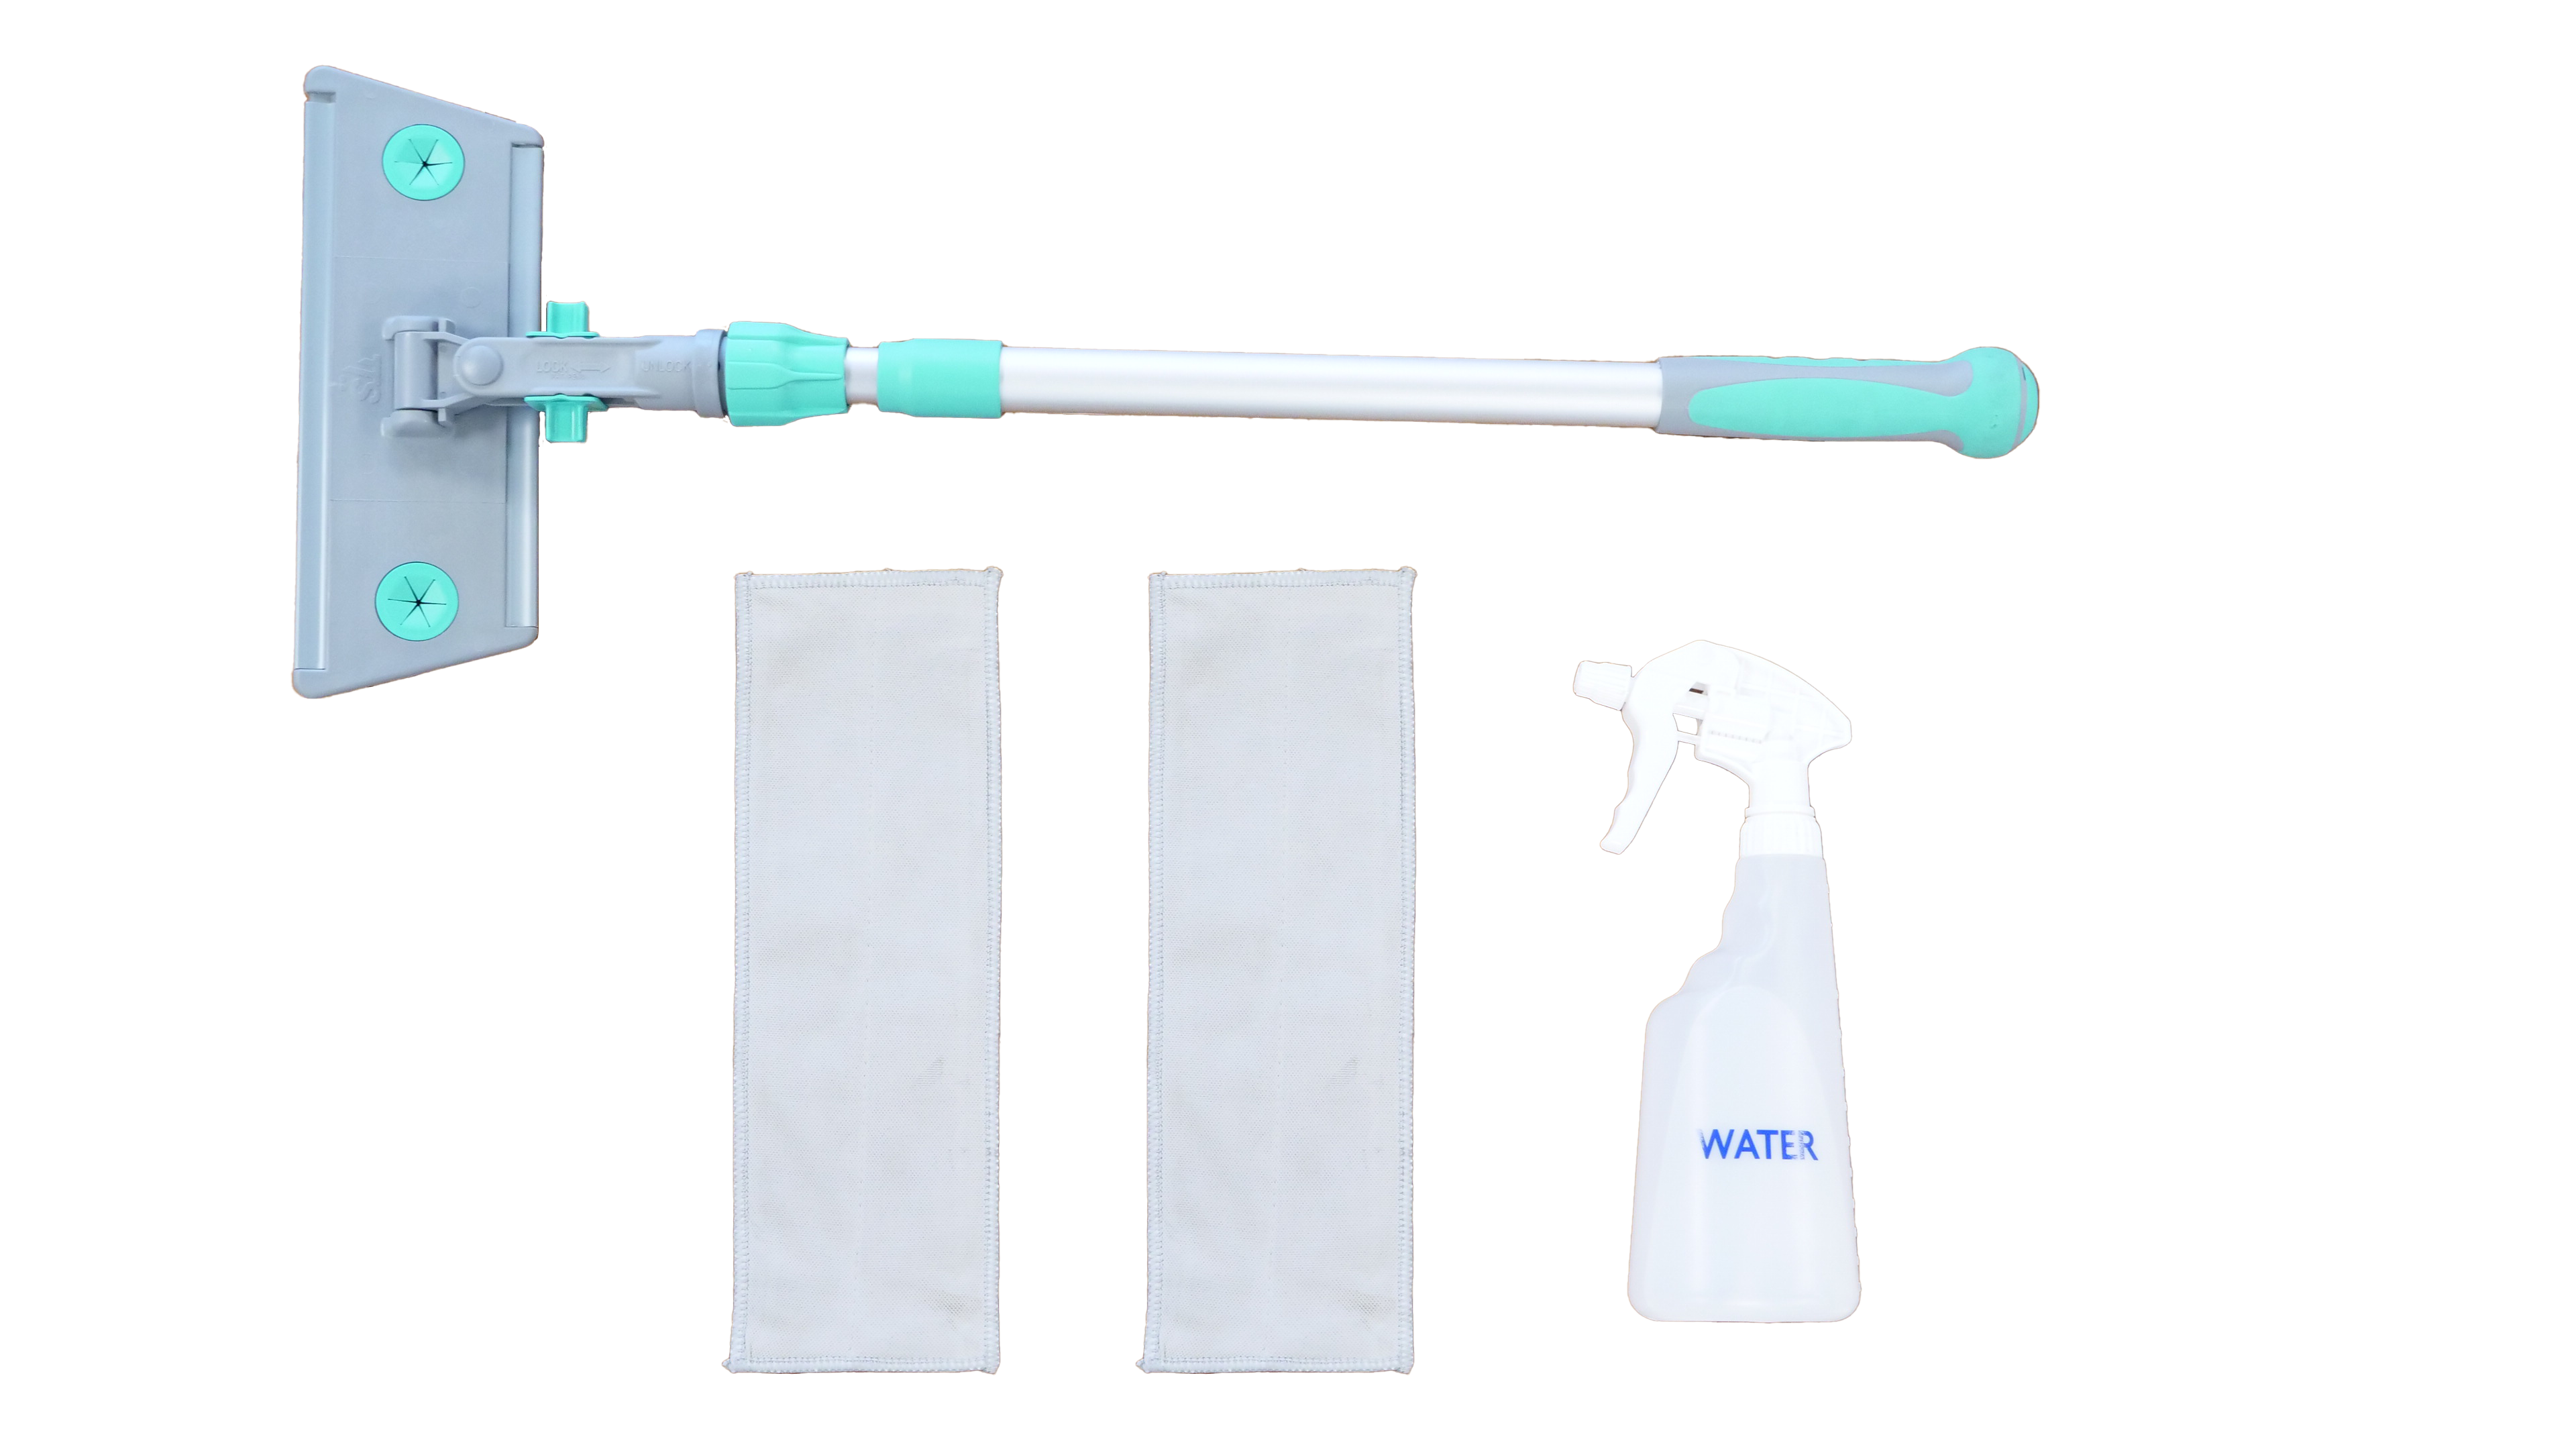 AUK Pro Surface Cleaning Tool Kit